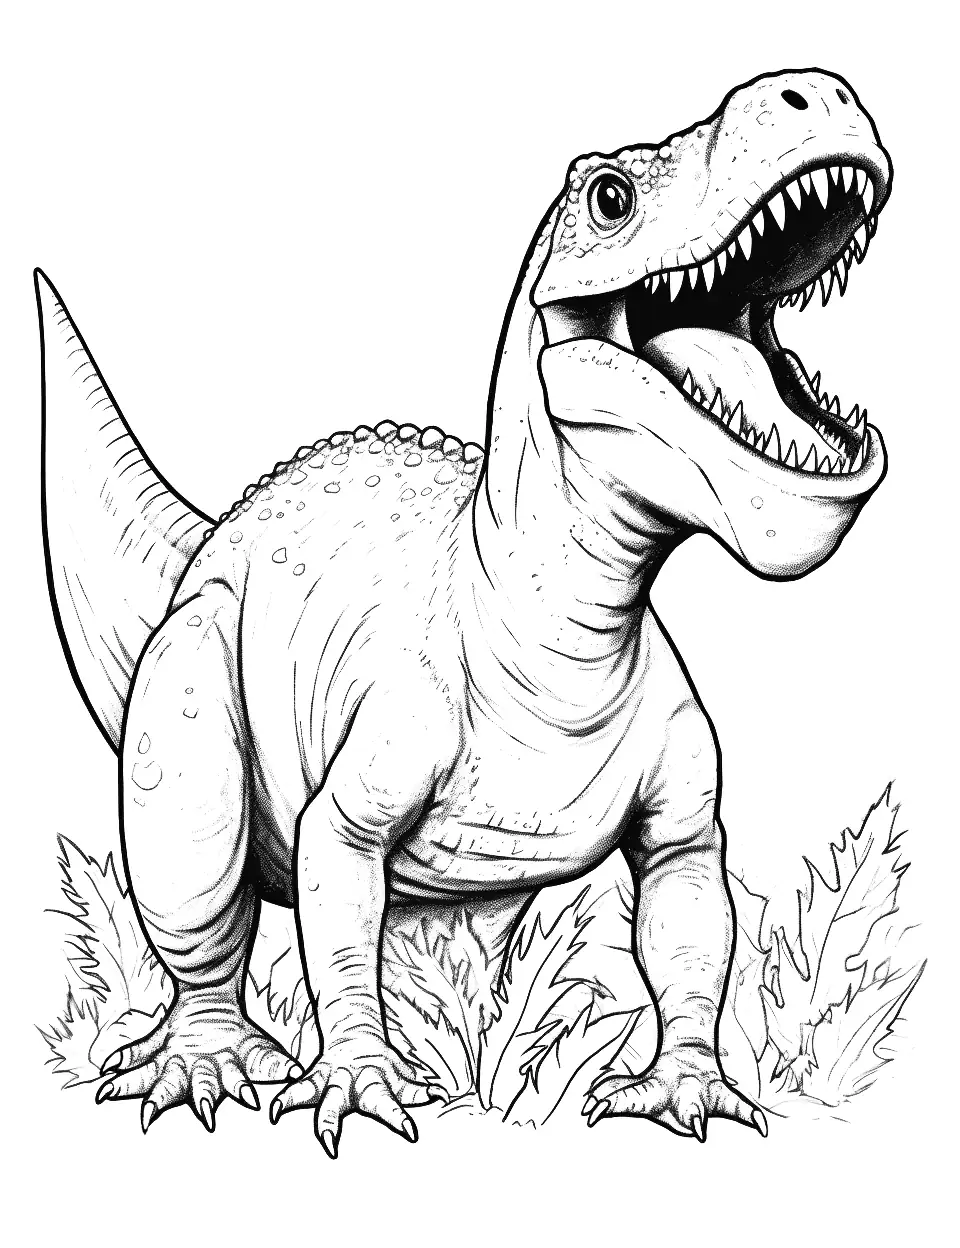 Indominus Rex Rampage Coloring Page - The Indominus Rex on a rampage in Jurassic World.